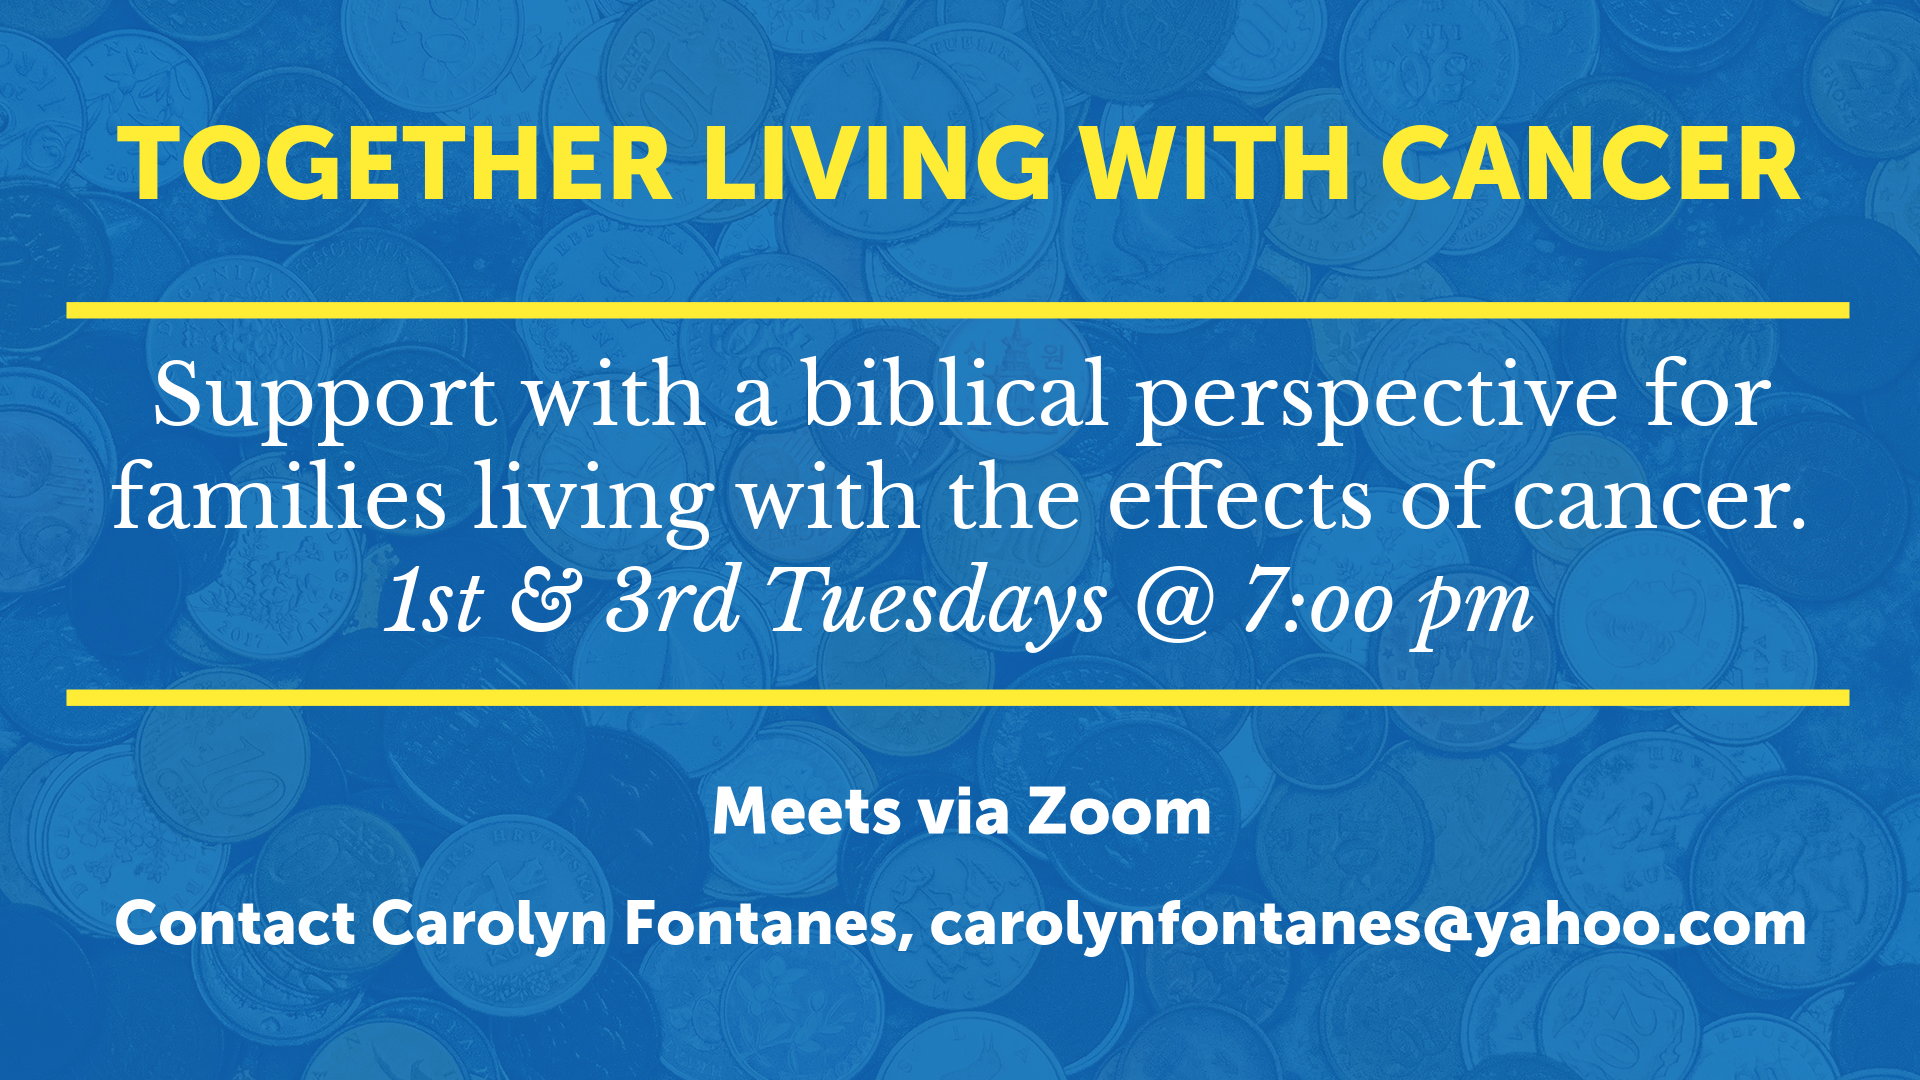 a poster for together living with cancer support with a biblical perspective for families living with the effects of cancer .